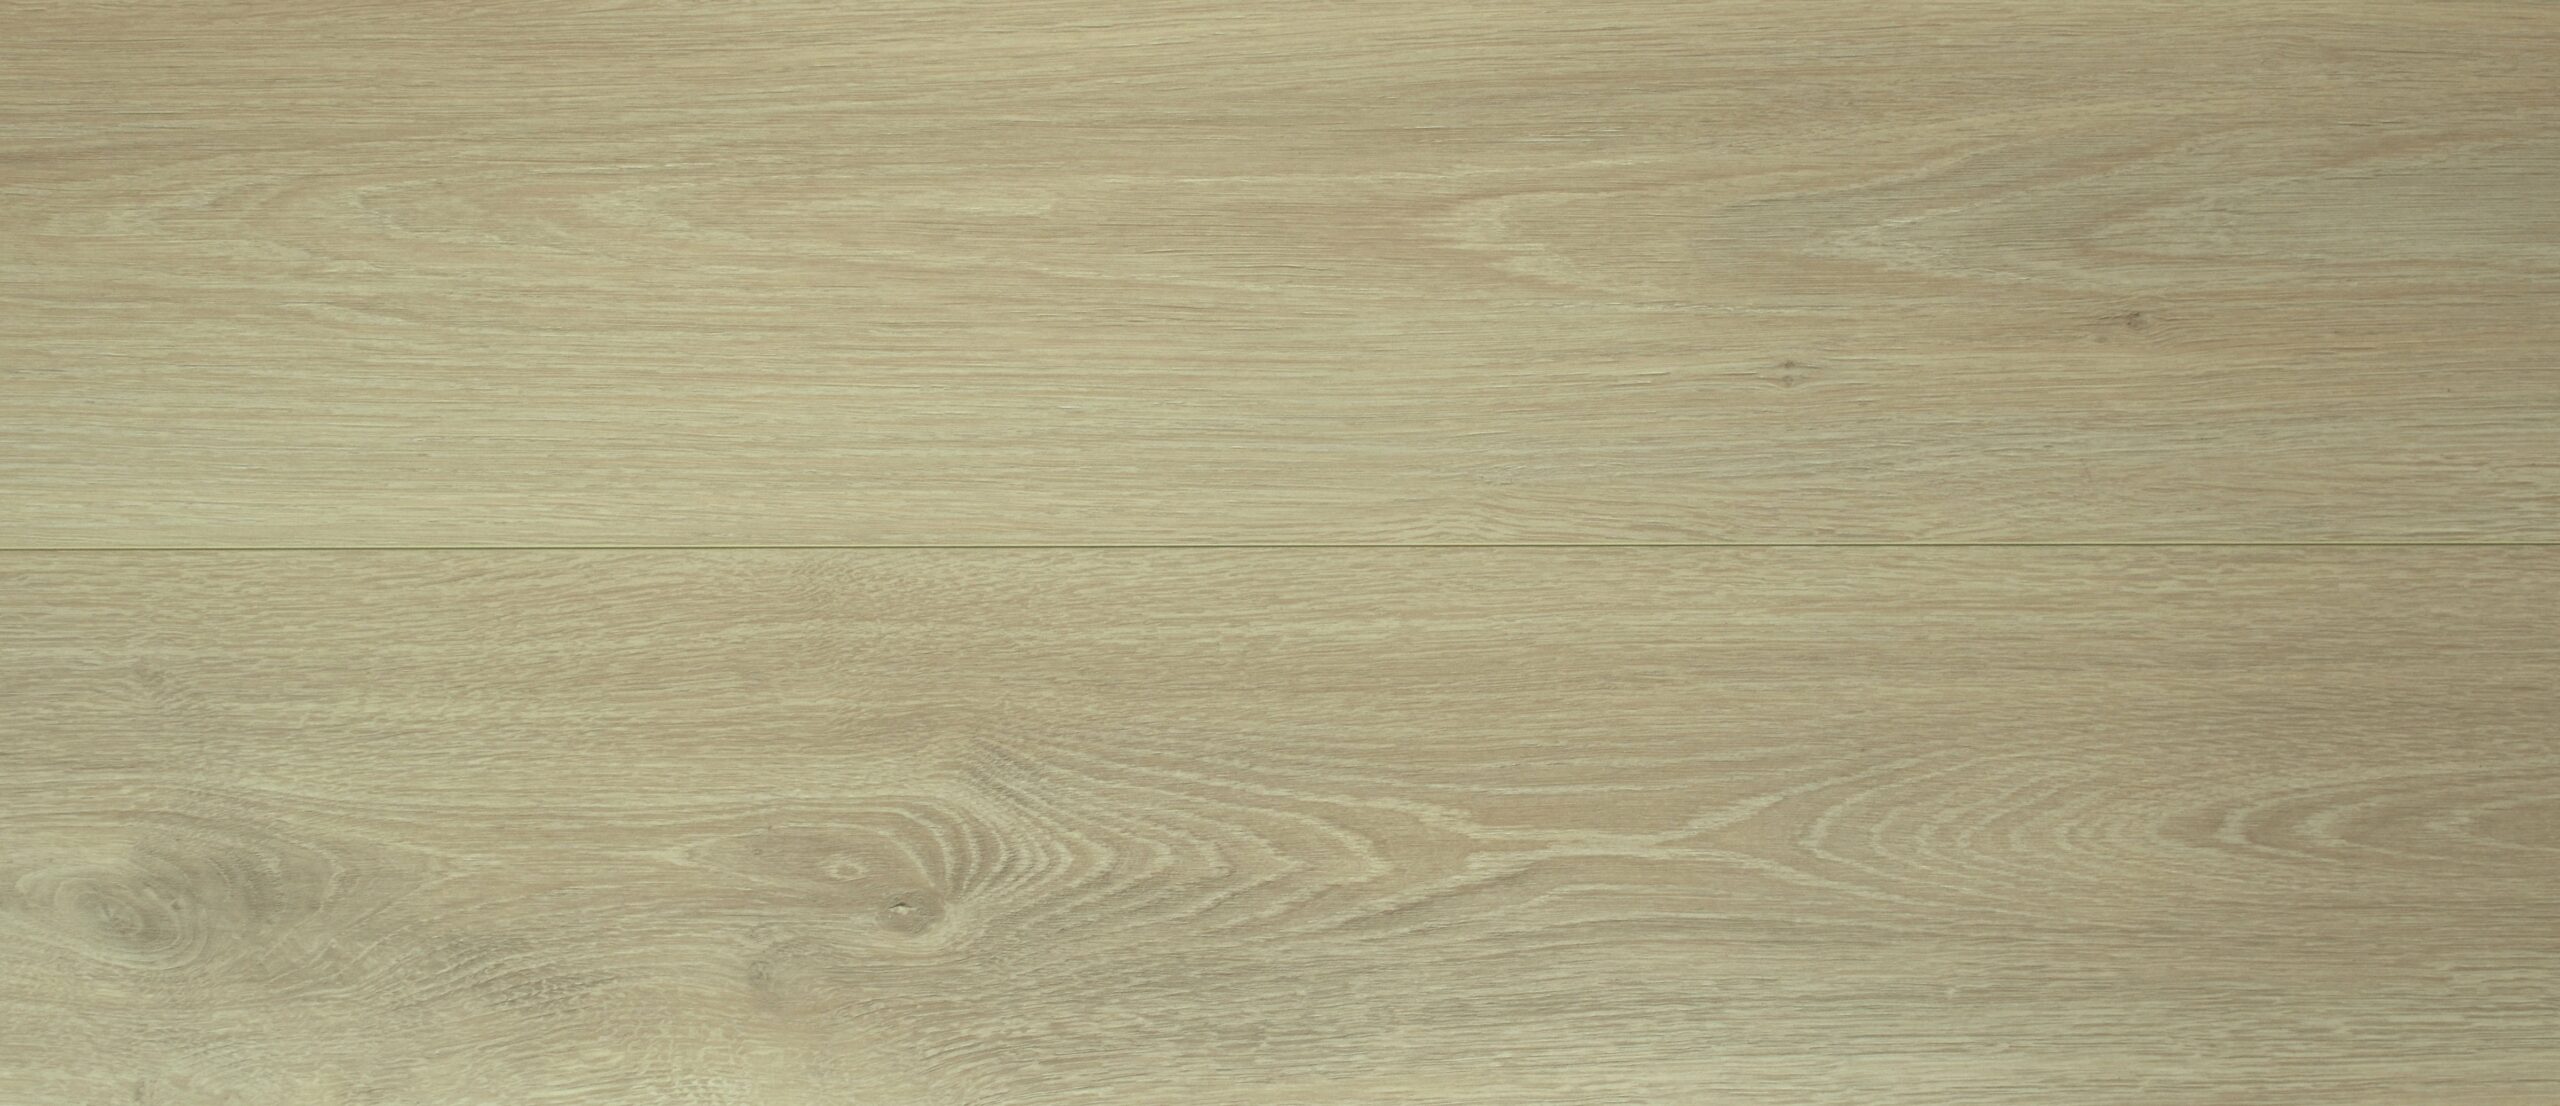 Light Oak Optimum Laminate Flooring with Built-In EIR Backing and AC4 wear layer